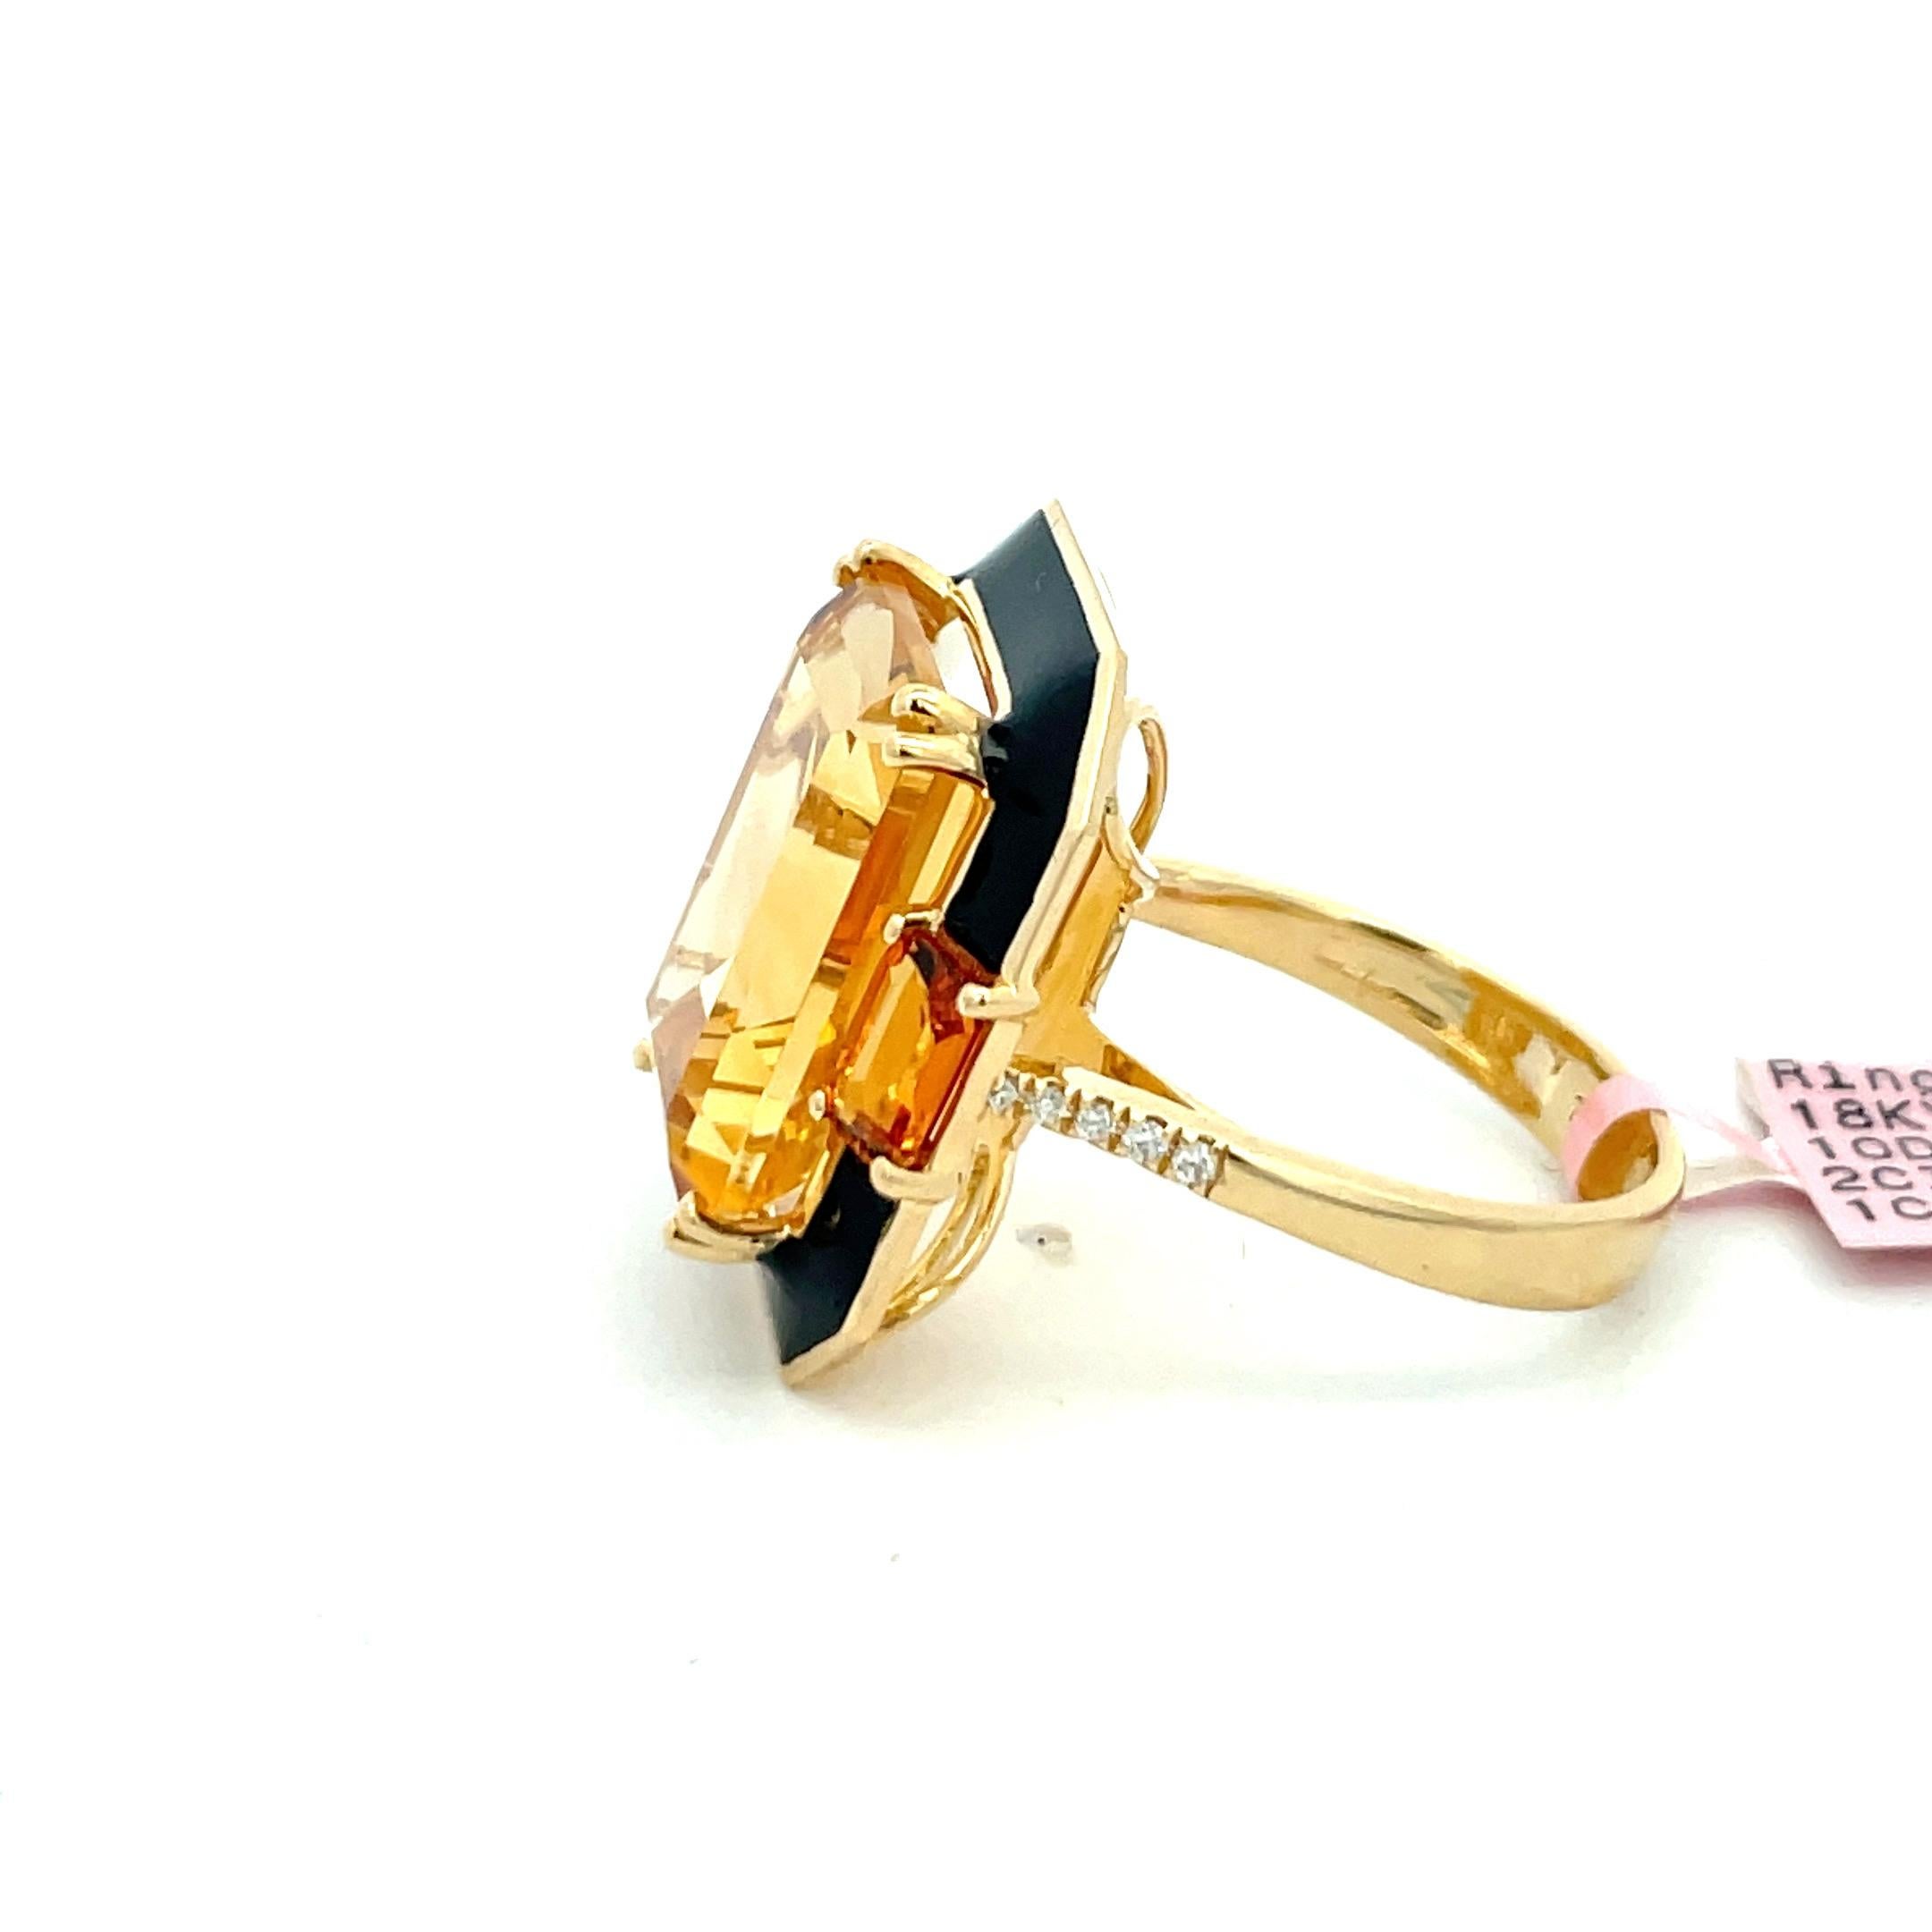 One large cocktail ring, featuring a center citrine weighing 11.50 carrots flying to it too small as citrines weighing 1.28 carats surrounded by black enamel. On the mounting there are 10 diamonds weighing 0.06 carats. 
Citrine 16 MM * 12
Ring
22.2